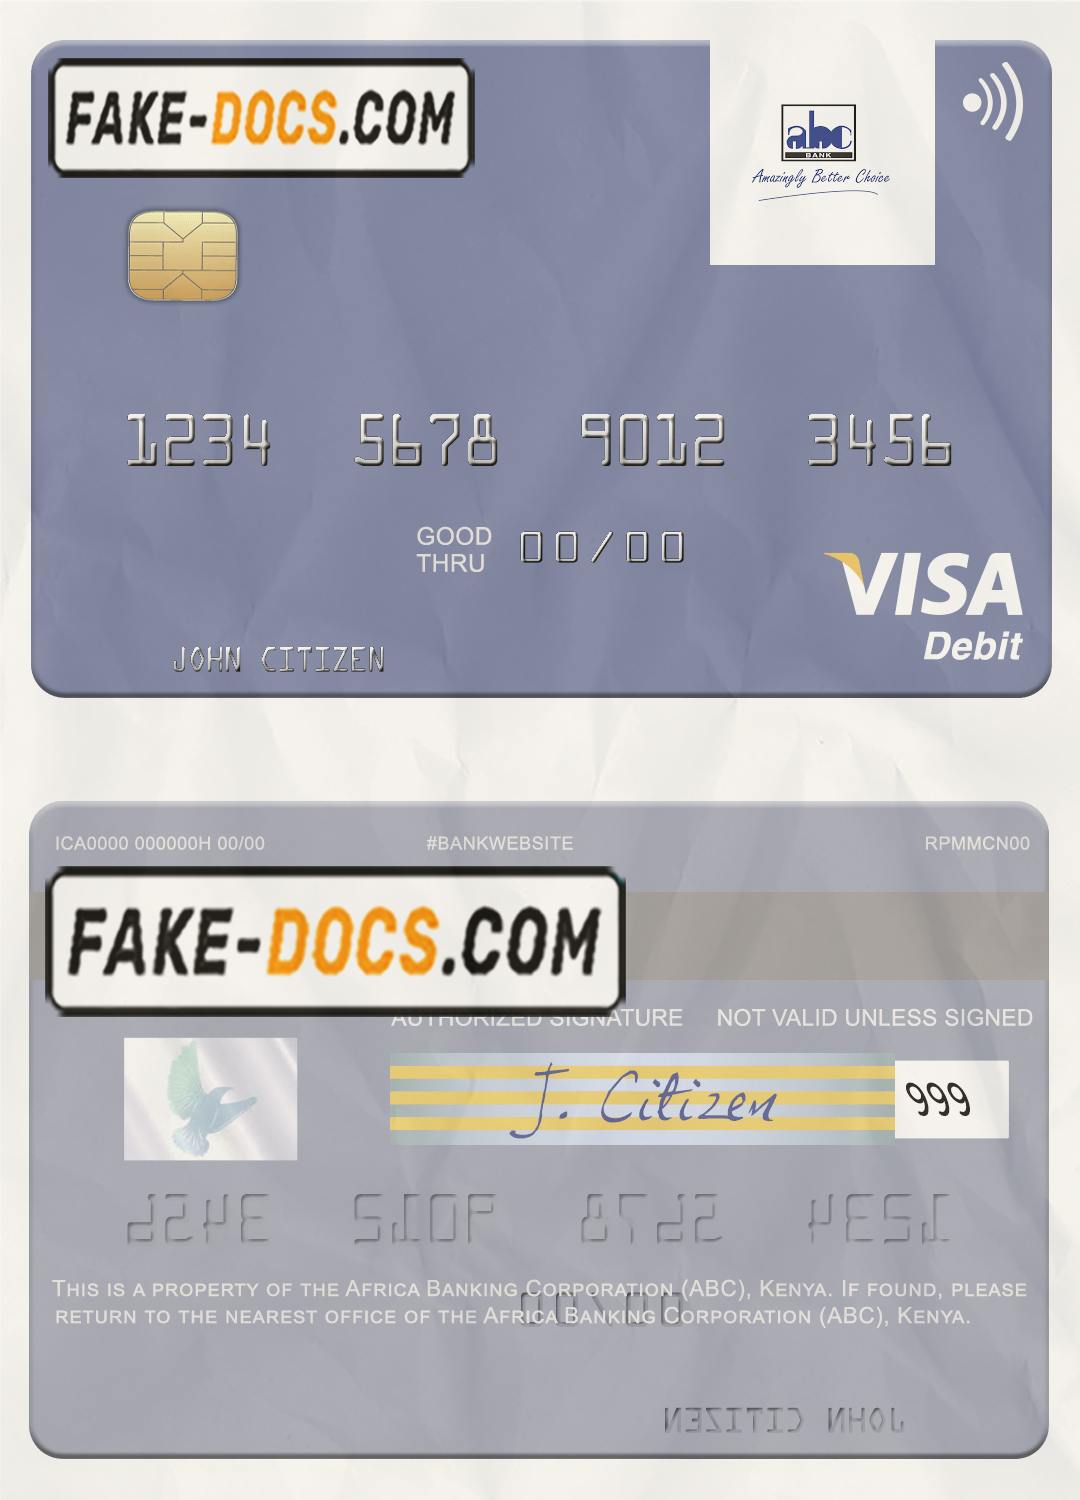 Africa Banking Corporation (ABC) Kenya visa card fully editable template in PSD format scan